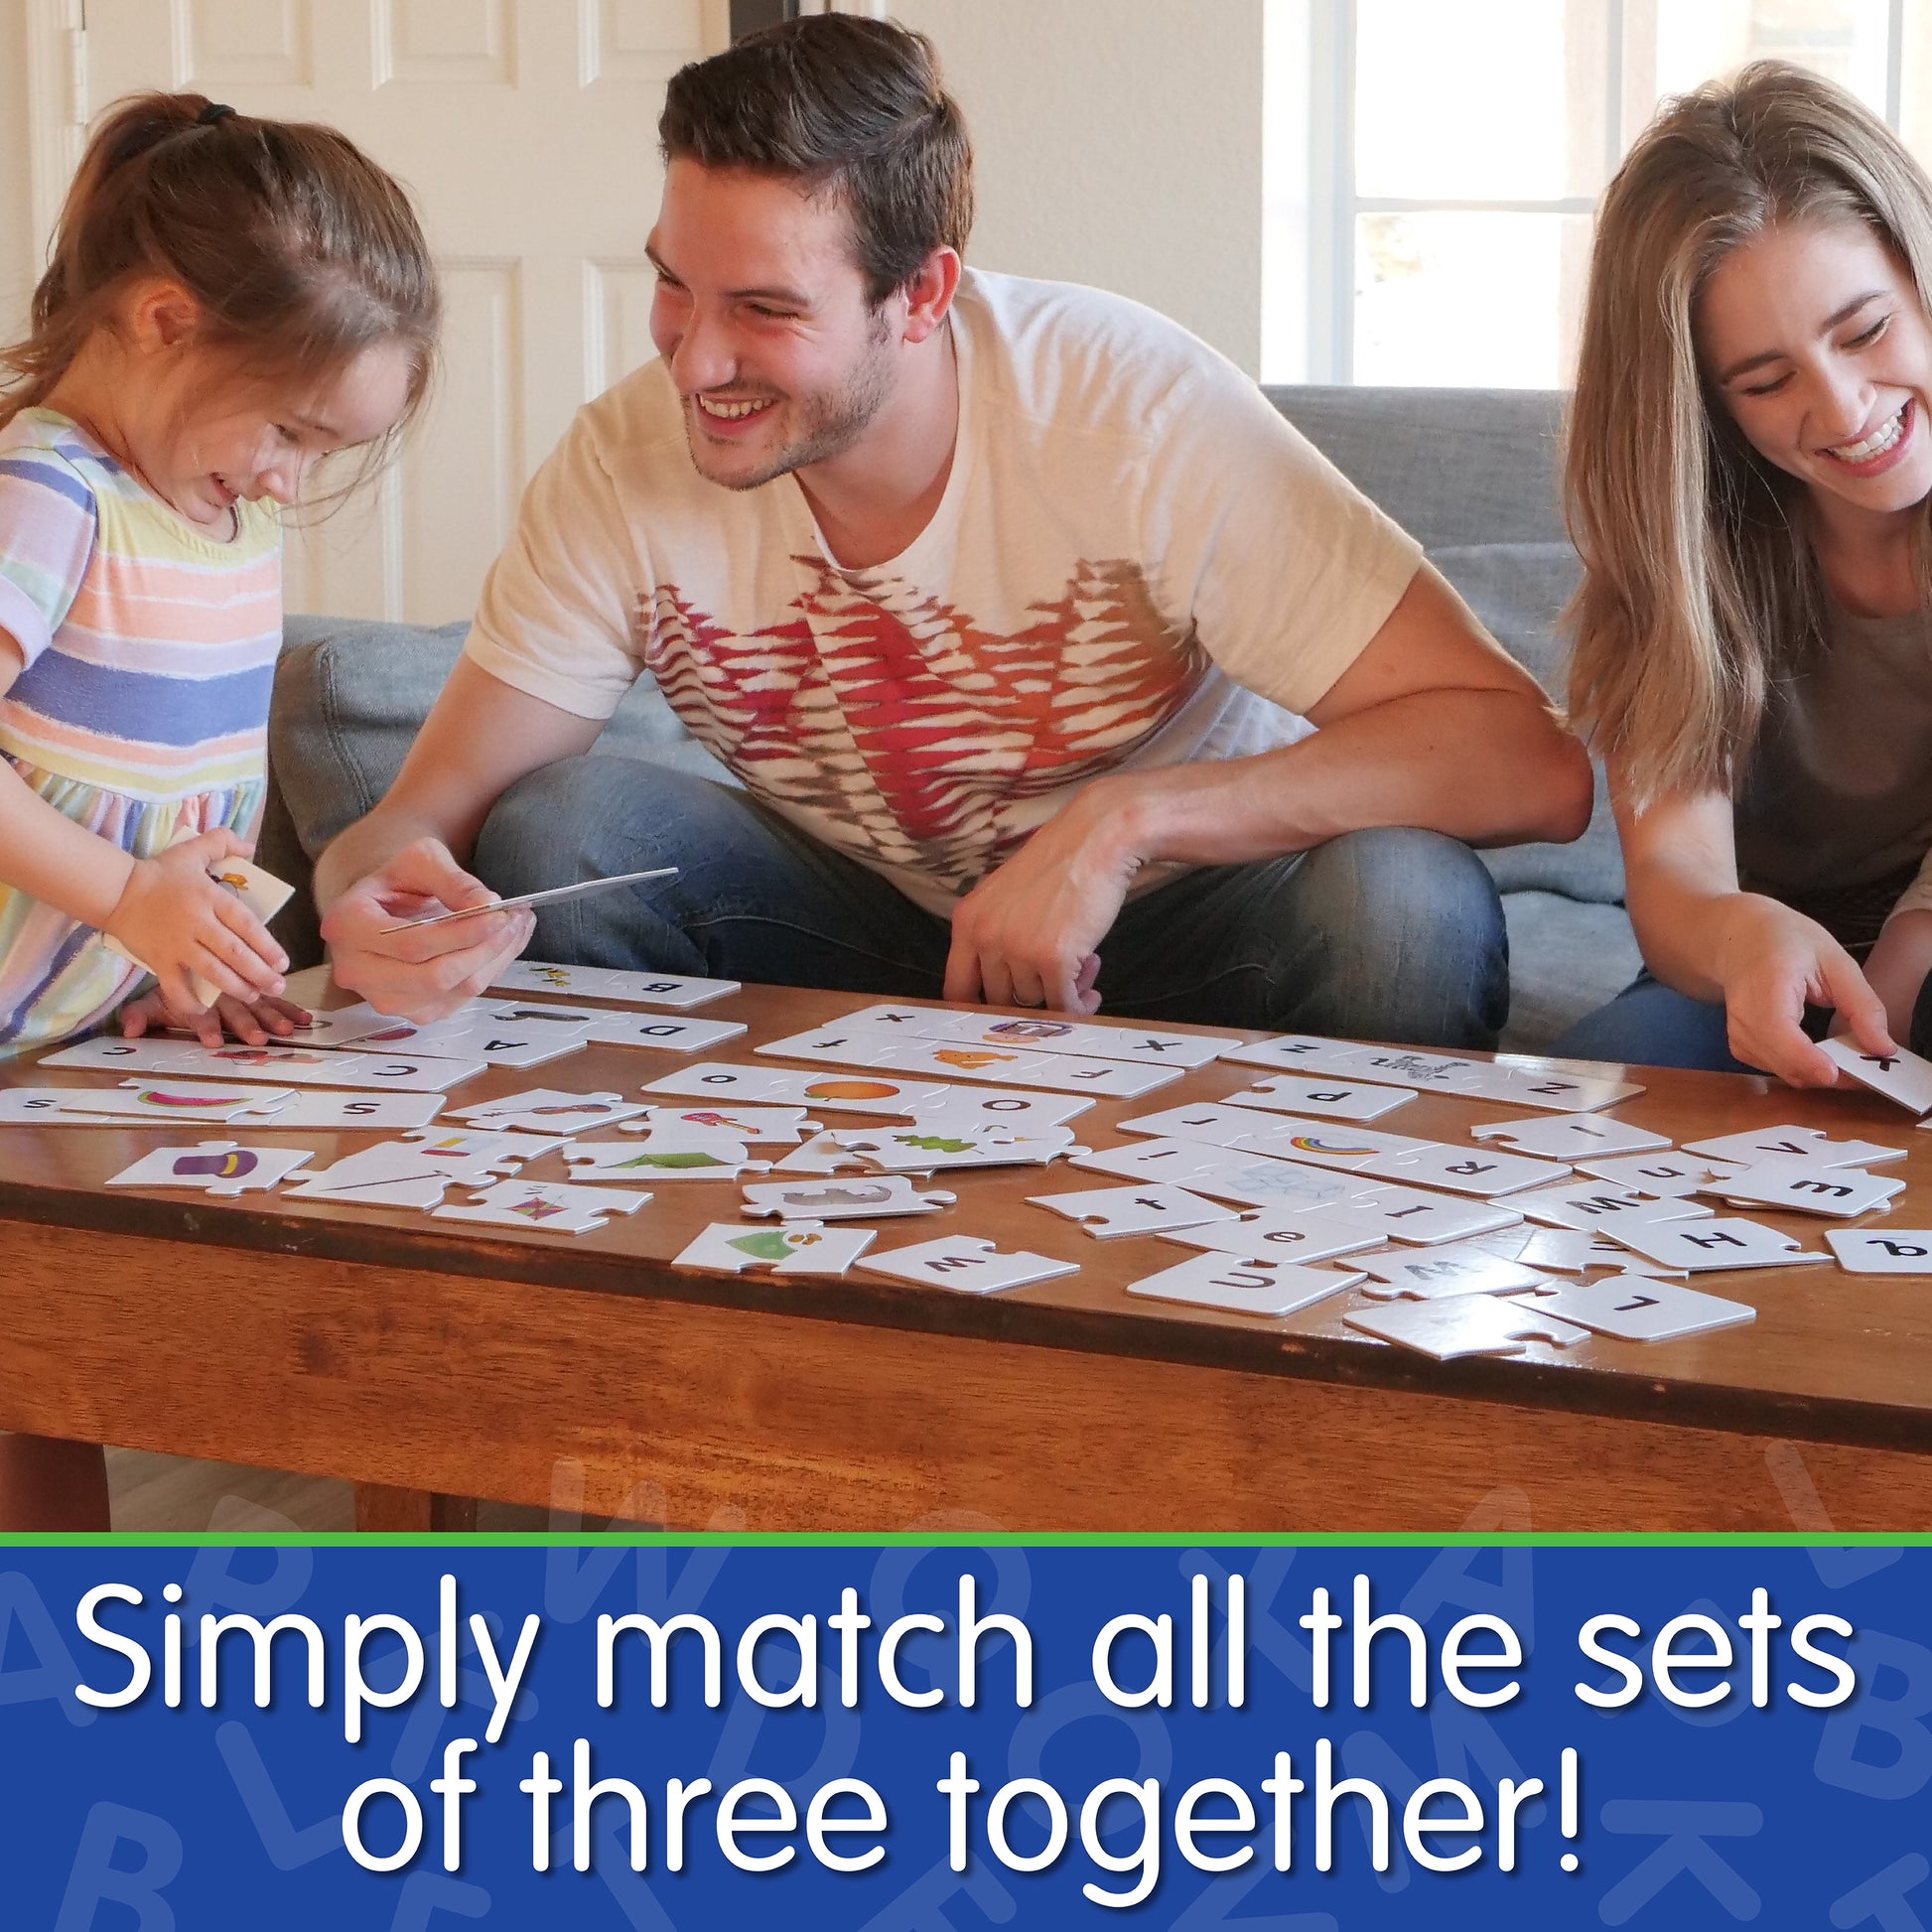 Infographic of young family playing Match It - Upper and Lower Case Letters together that says, "Simply match all the sets of three together!"